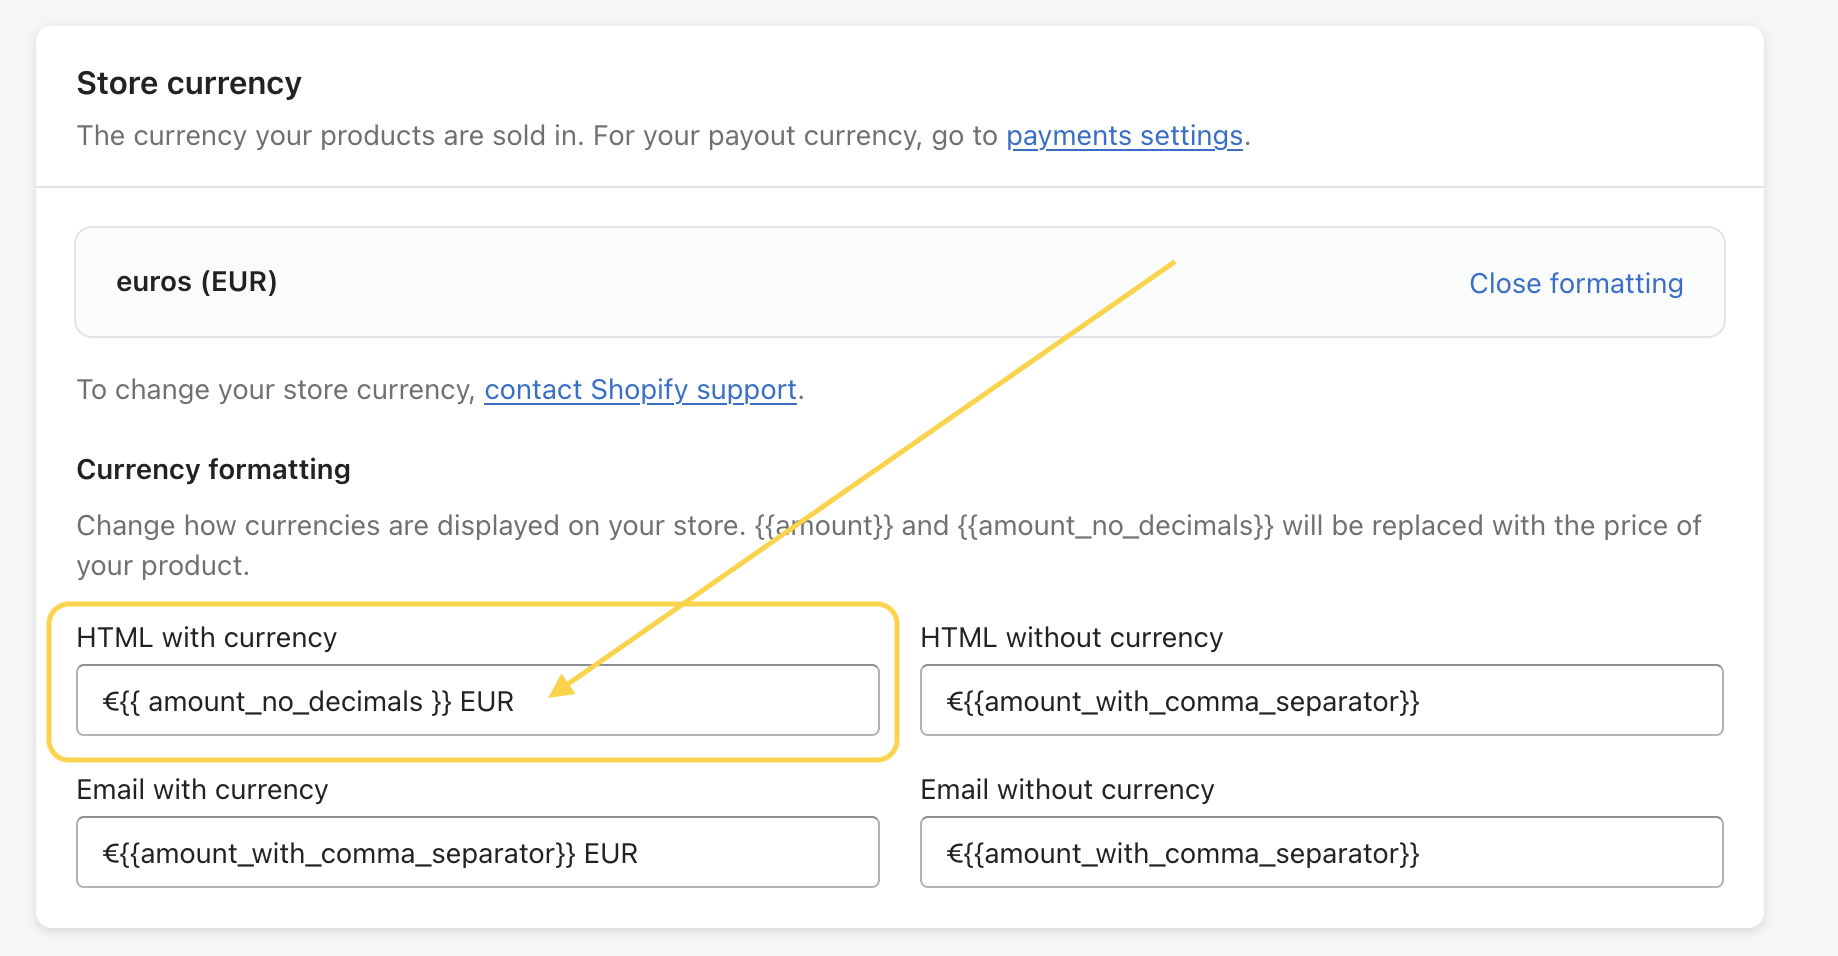 Changing currency formatting options on Shopify